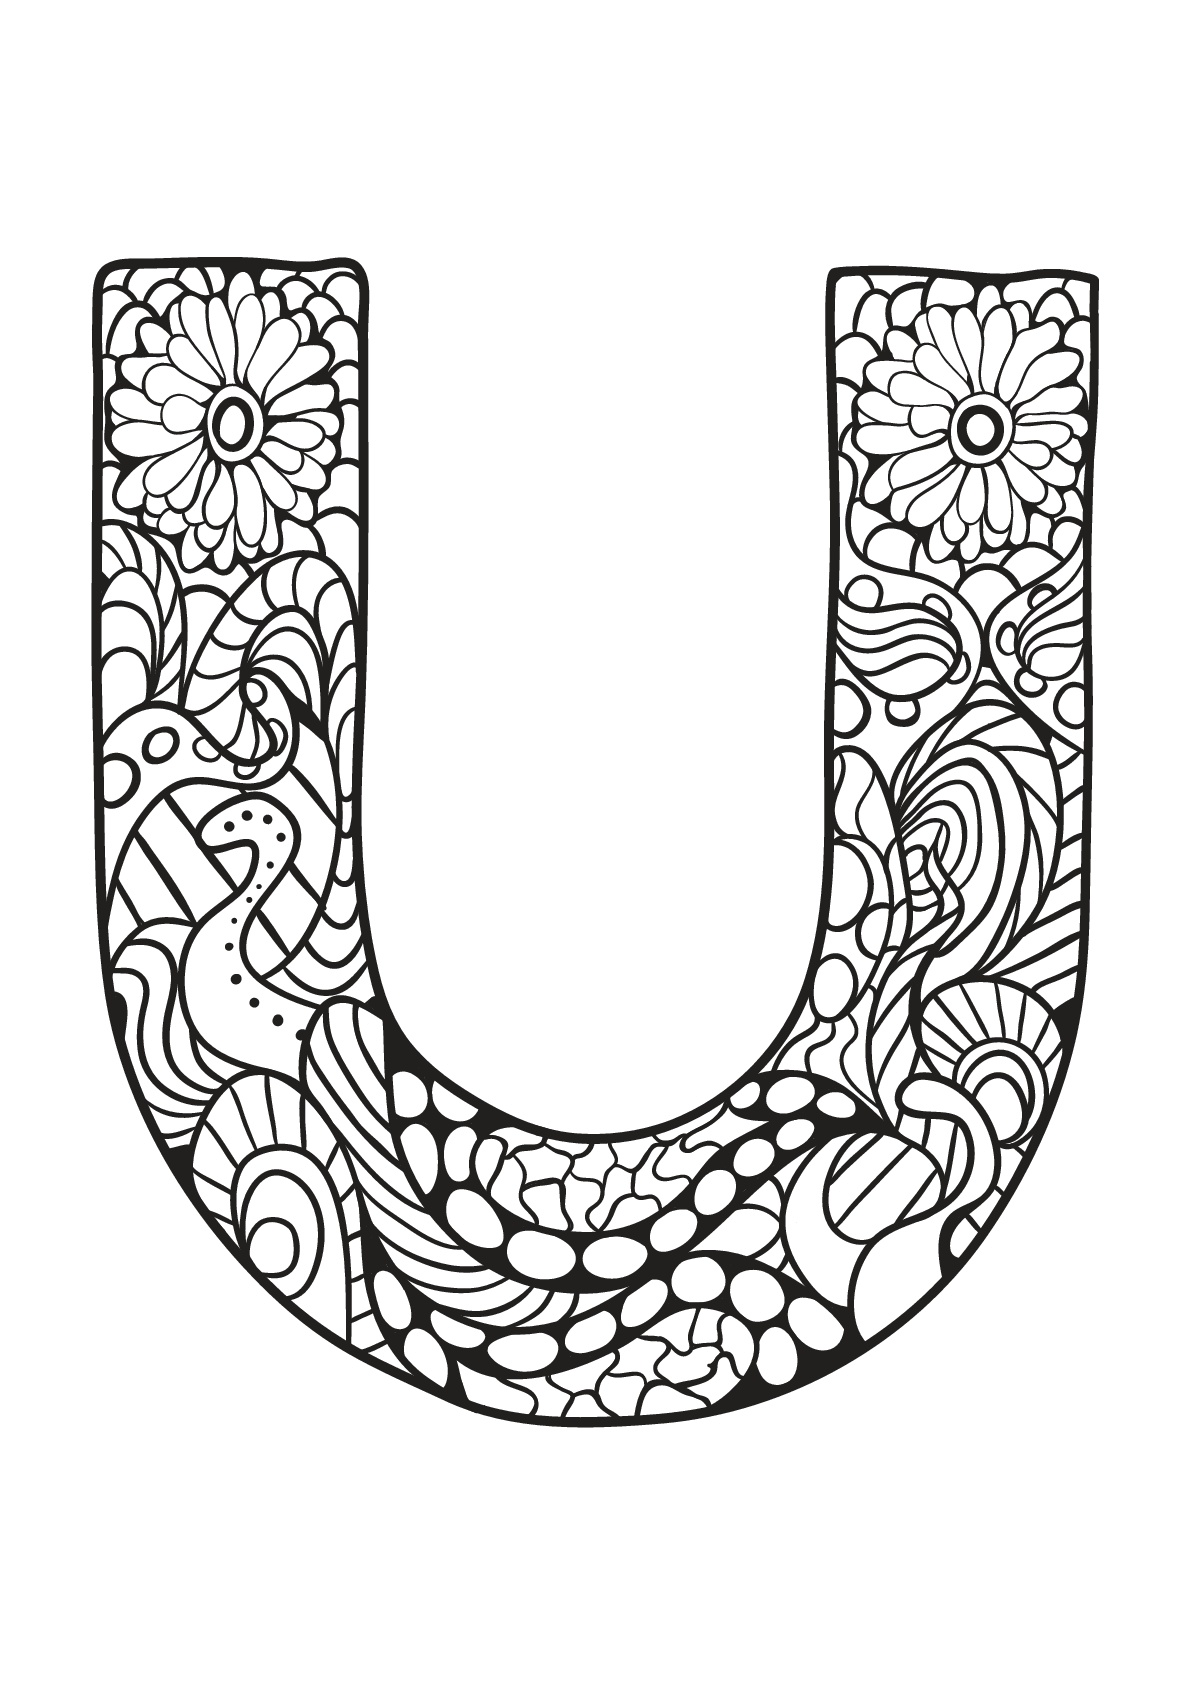 u coloring pages